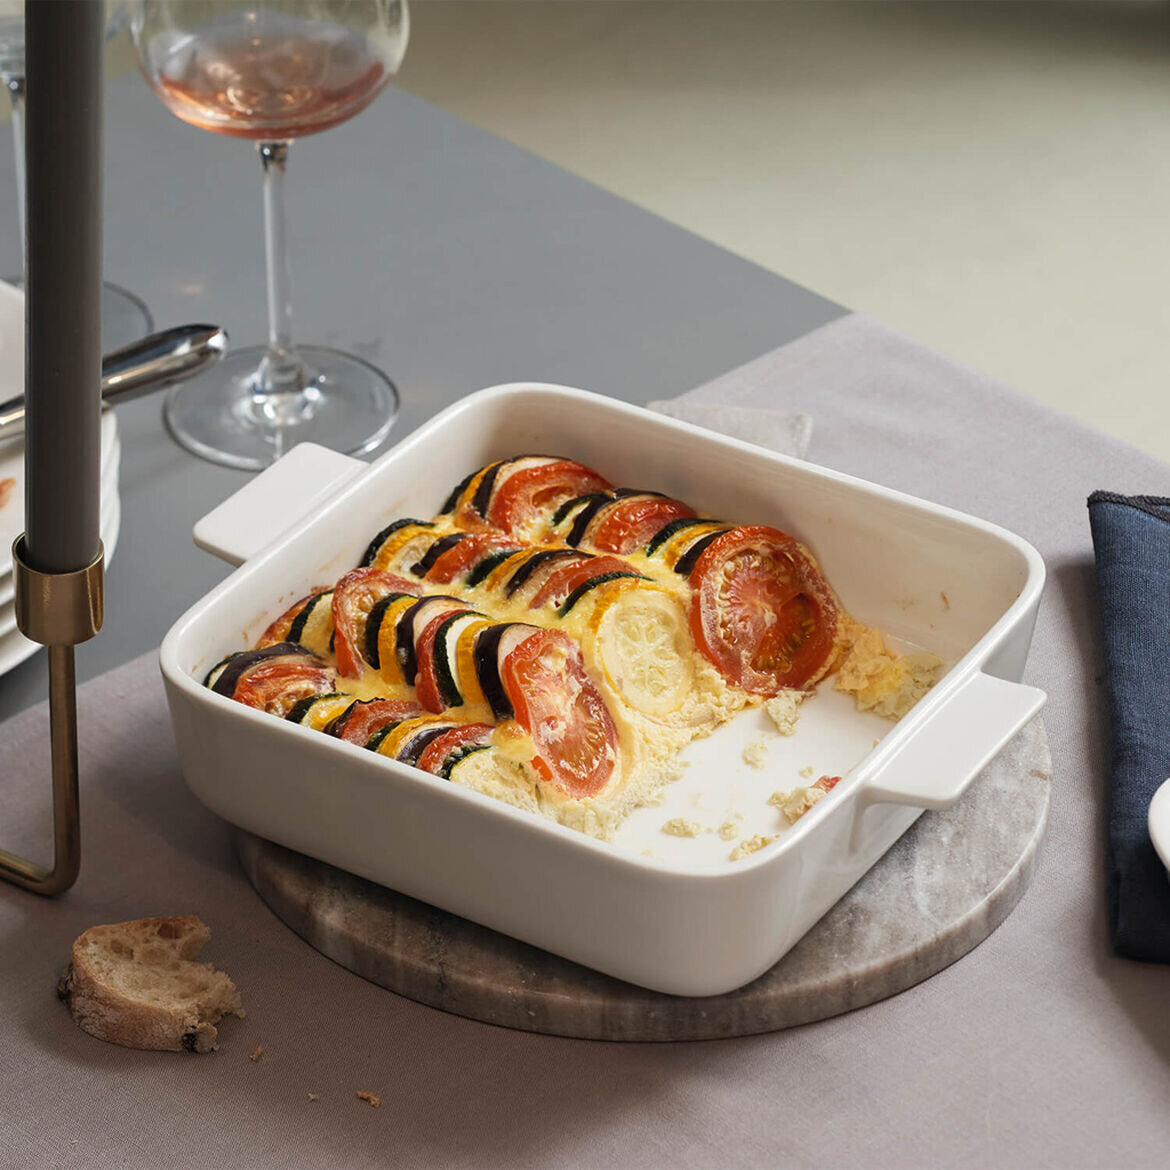 Villeroy & Boch Clever Cooking Square Baking Dish